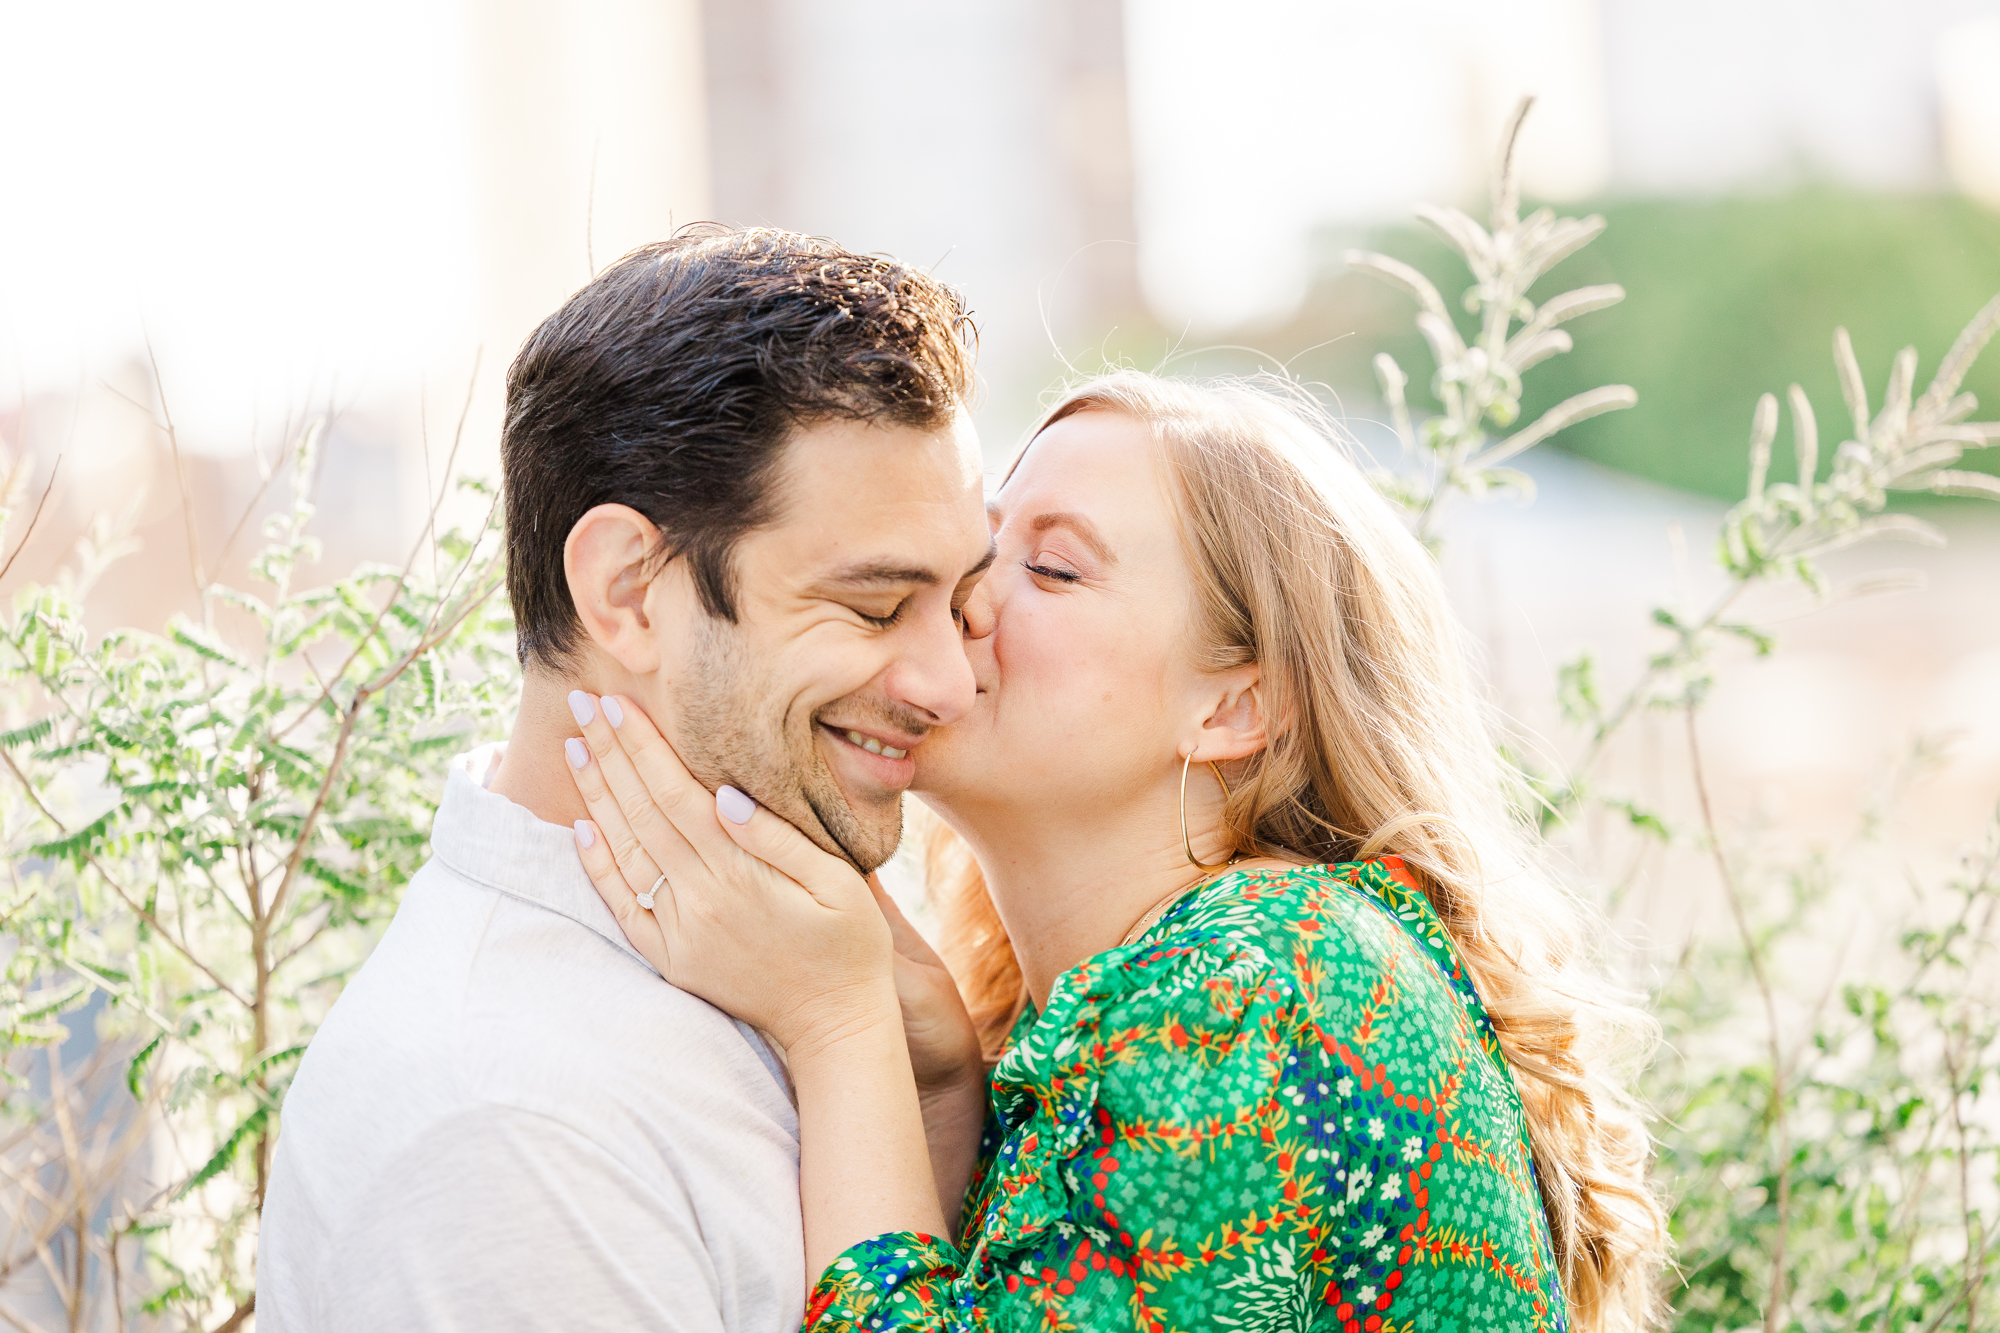 Lovely NYC Engagement Photography with Spring Blossoms